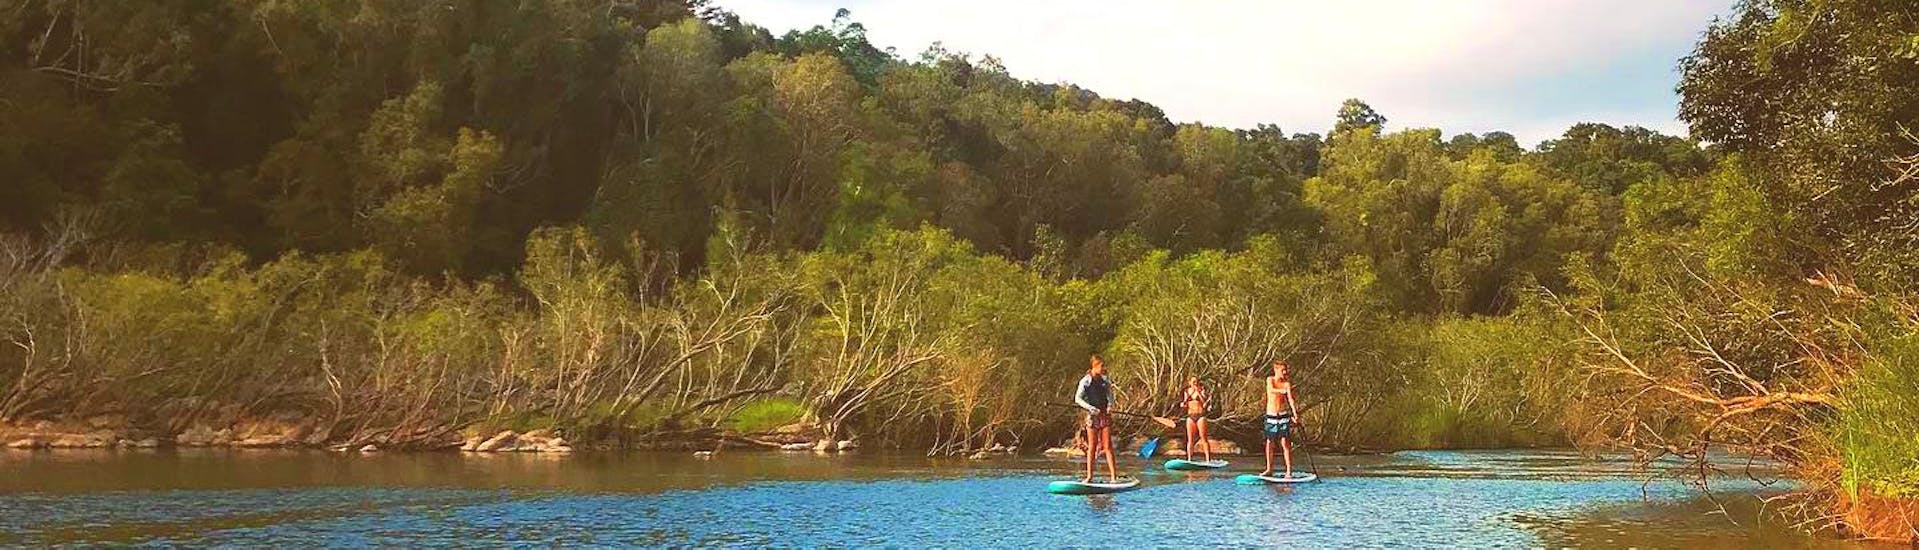 rainforest-stand-up-paddle-boarding-in-cairns-pacific-watersports